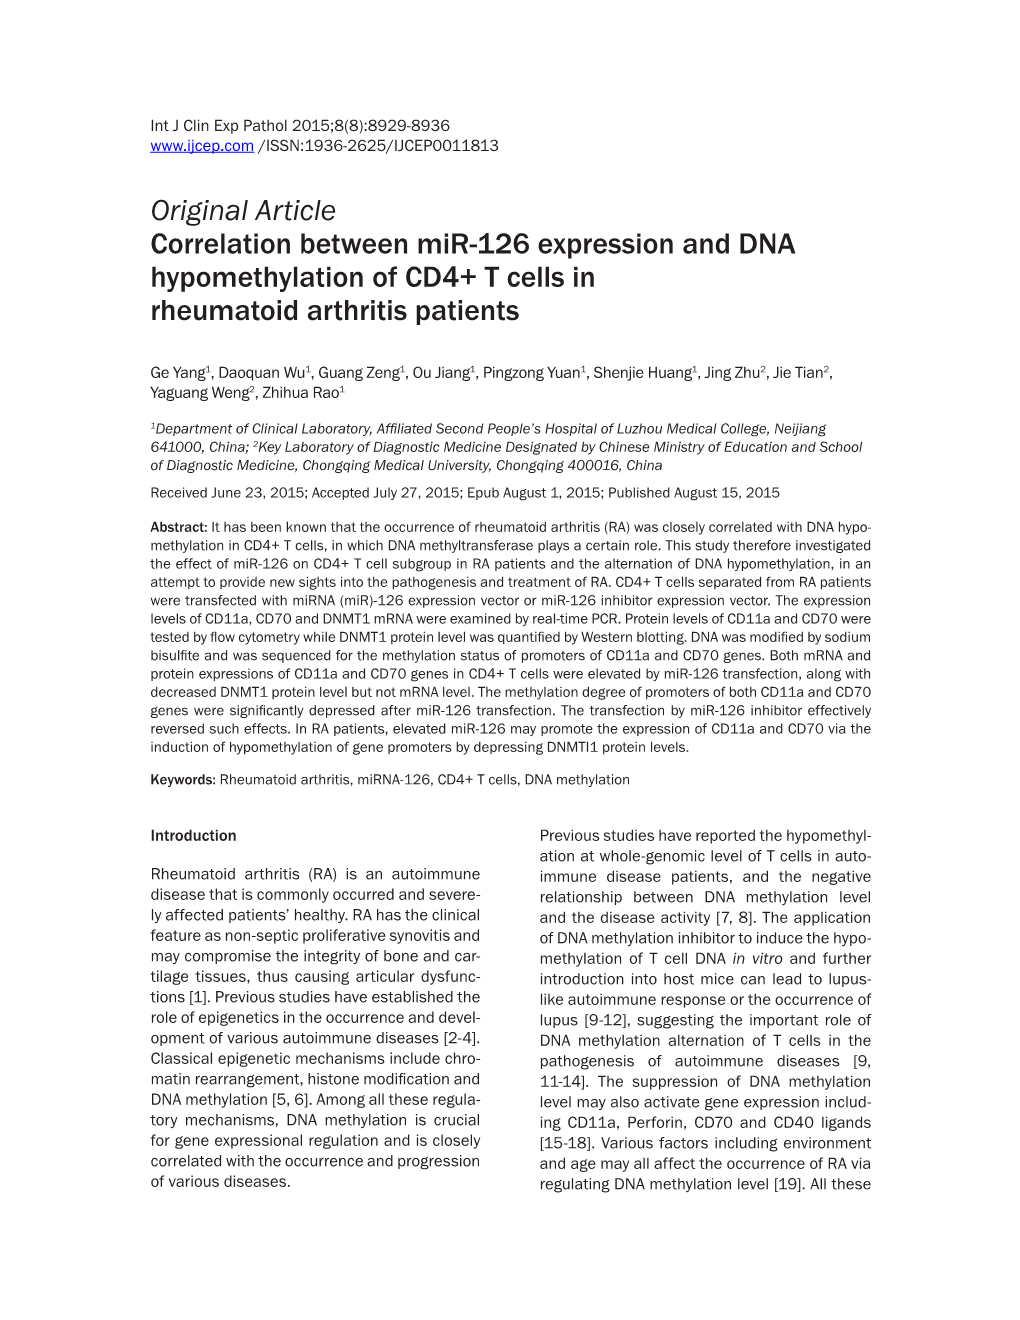 Original Article Correlation Between Mir-126 Expression and DNA Hypomethylation of CD4+ T Cells in Rheumatoid Arthritis Patients